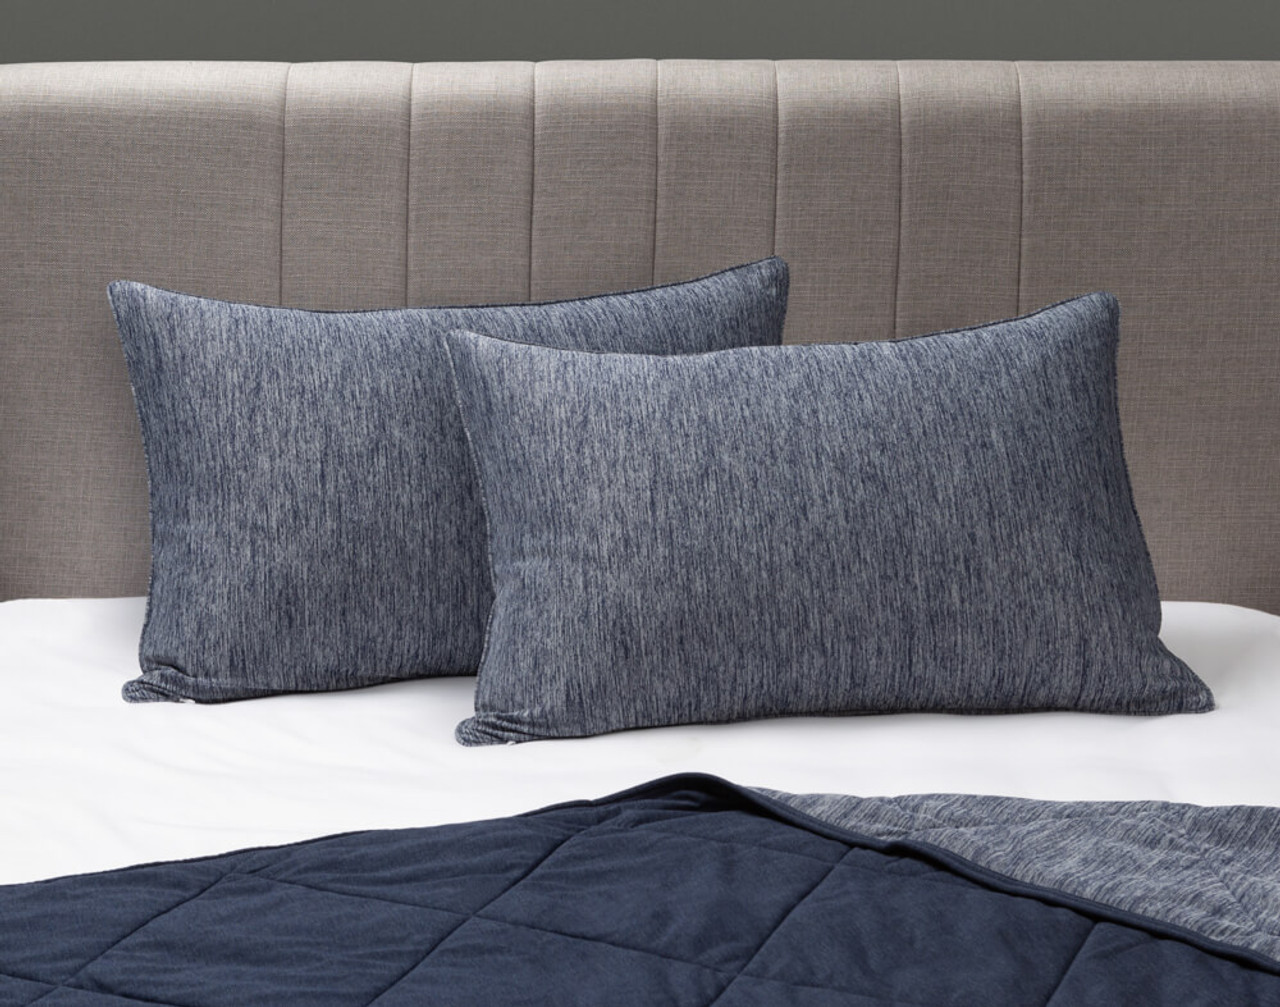 Our Cool Touch Pillowcases in Navy Blue sitting on a white & grey bed with a matching blanket underneath.